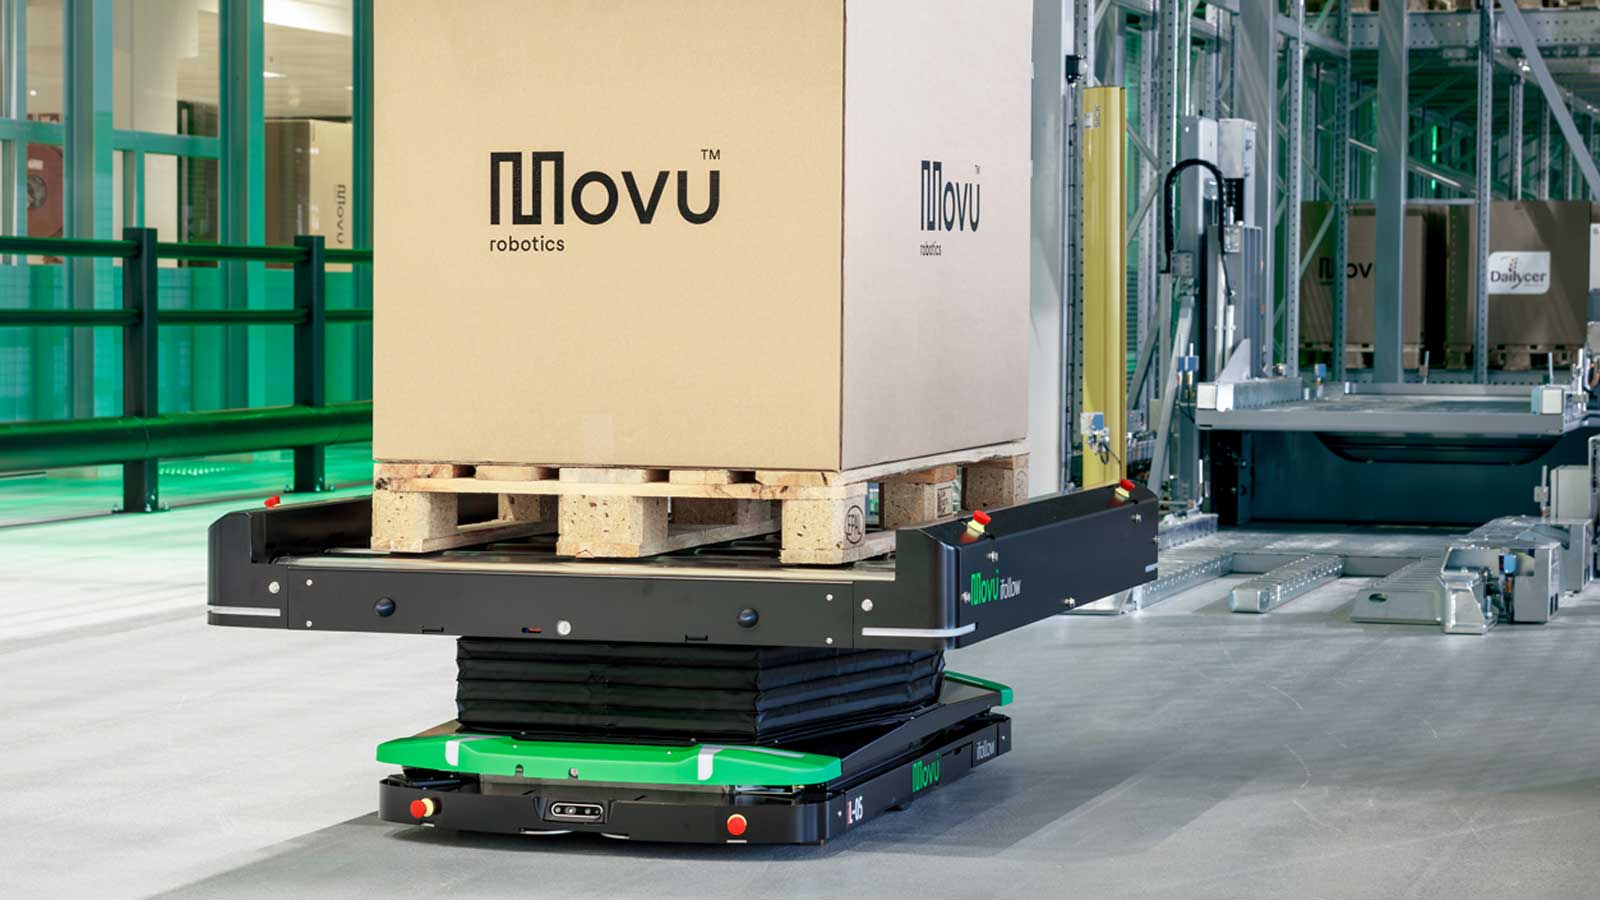 Movu ifollow AGV transporting pallet loads in warehouse